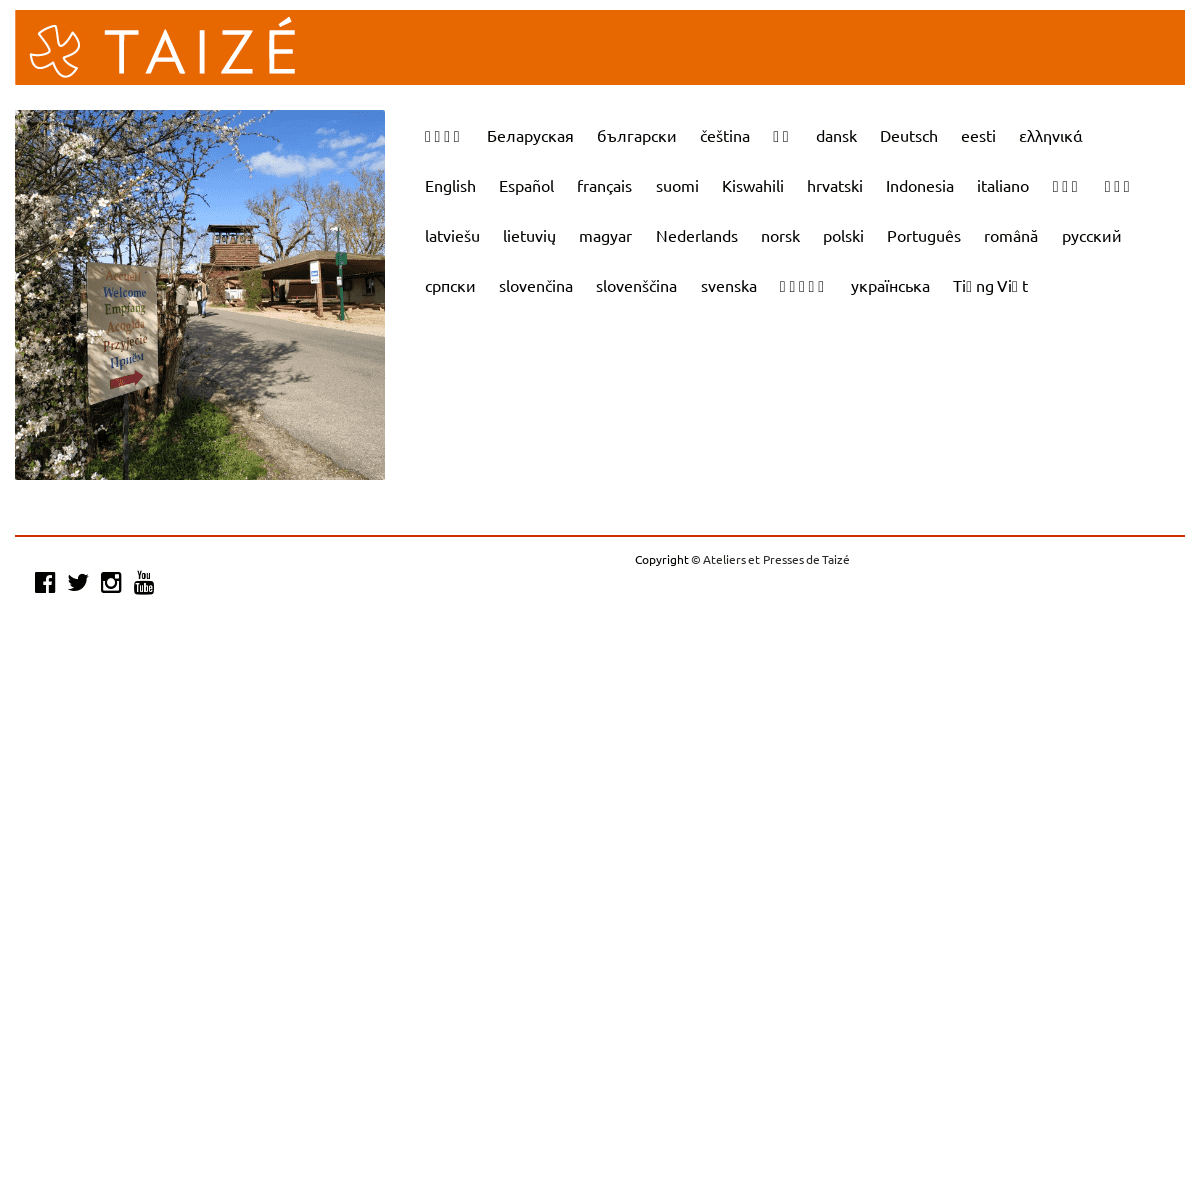 A complete backup of taize.fr